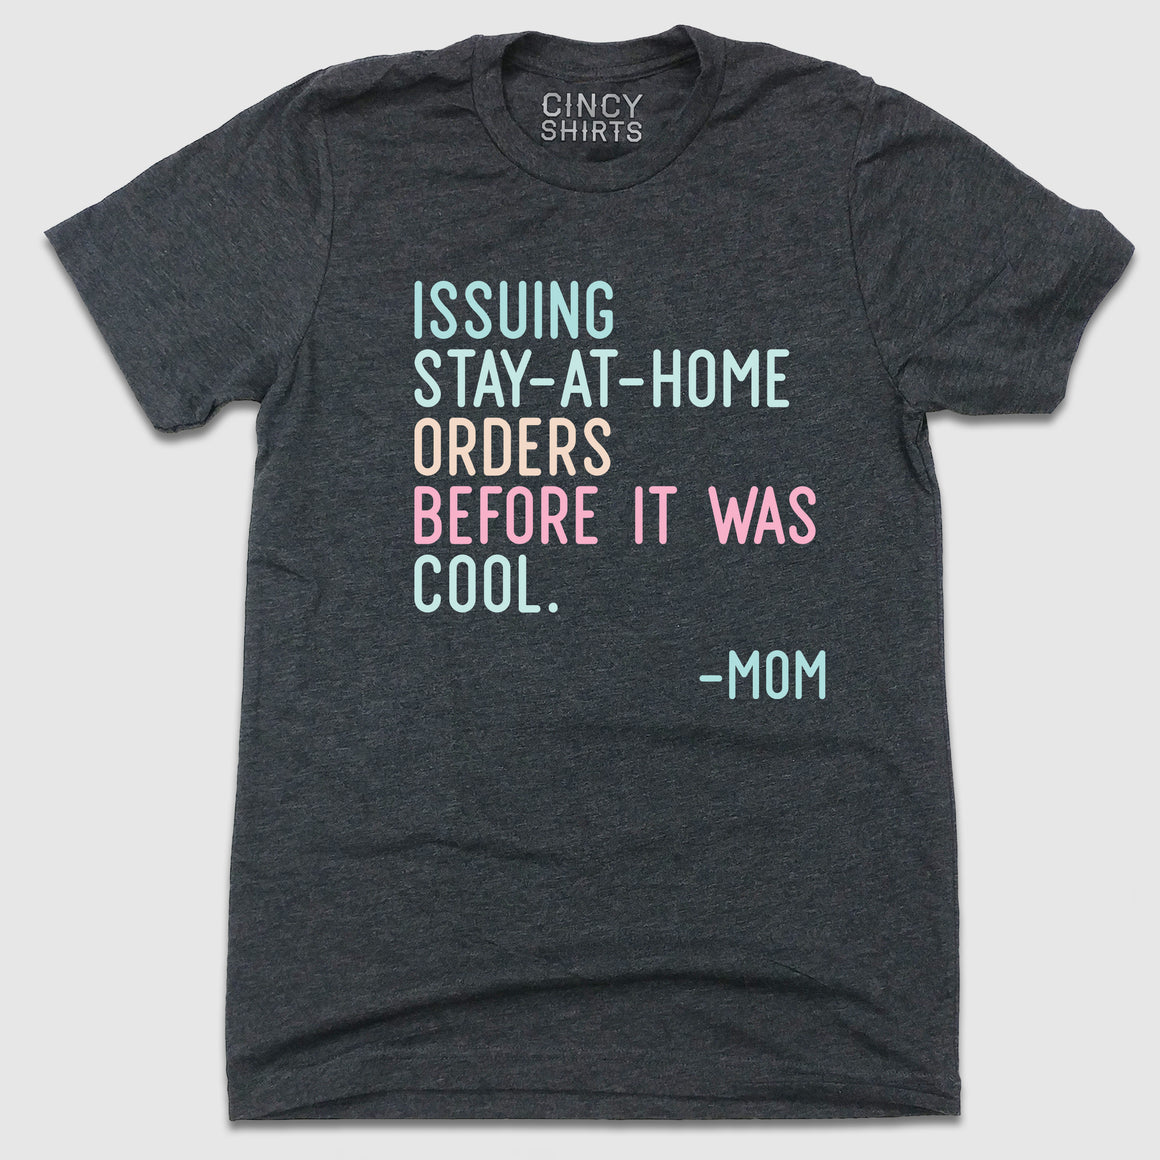 Stay-At-Home Orders - Mom - Cincy Shirts